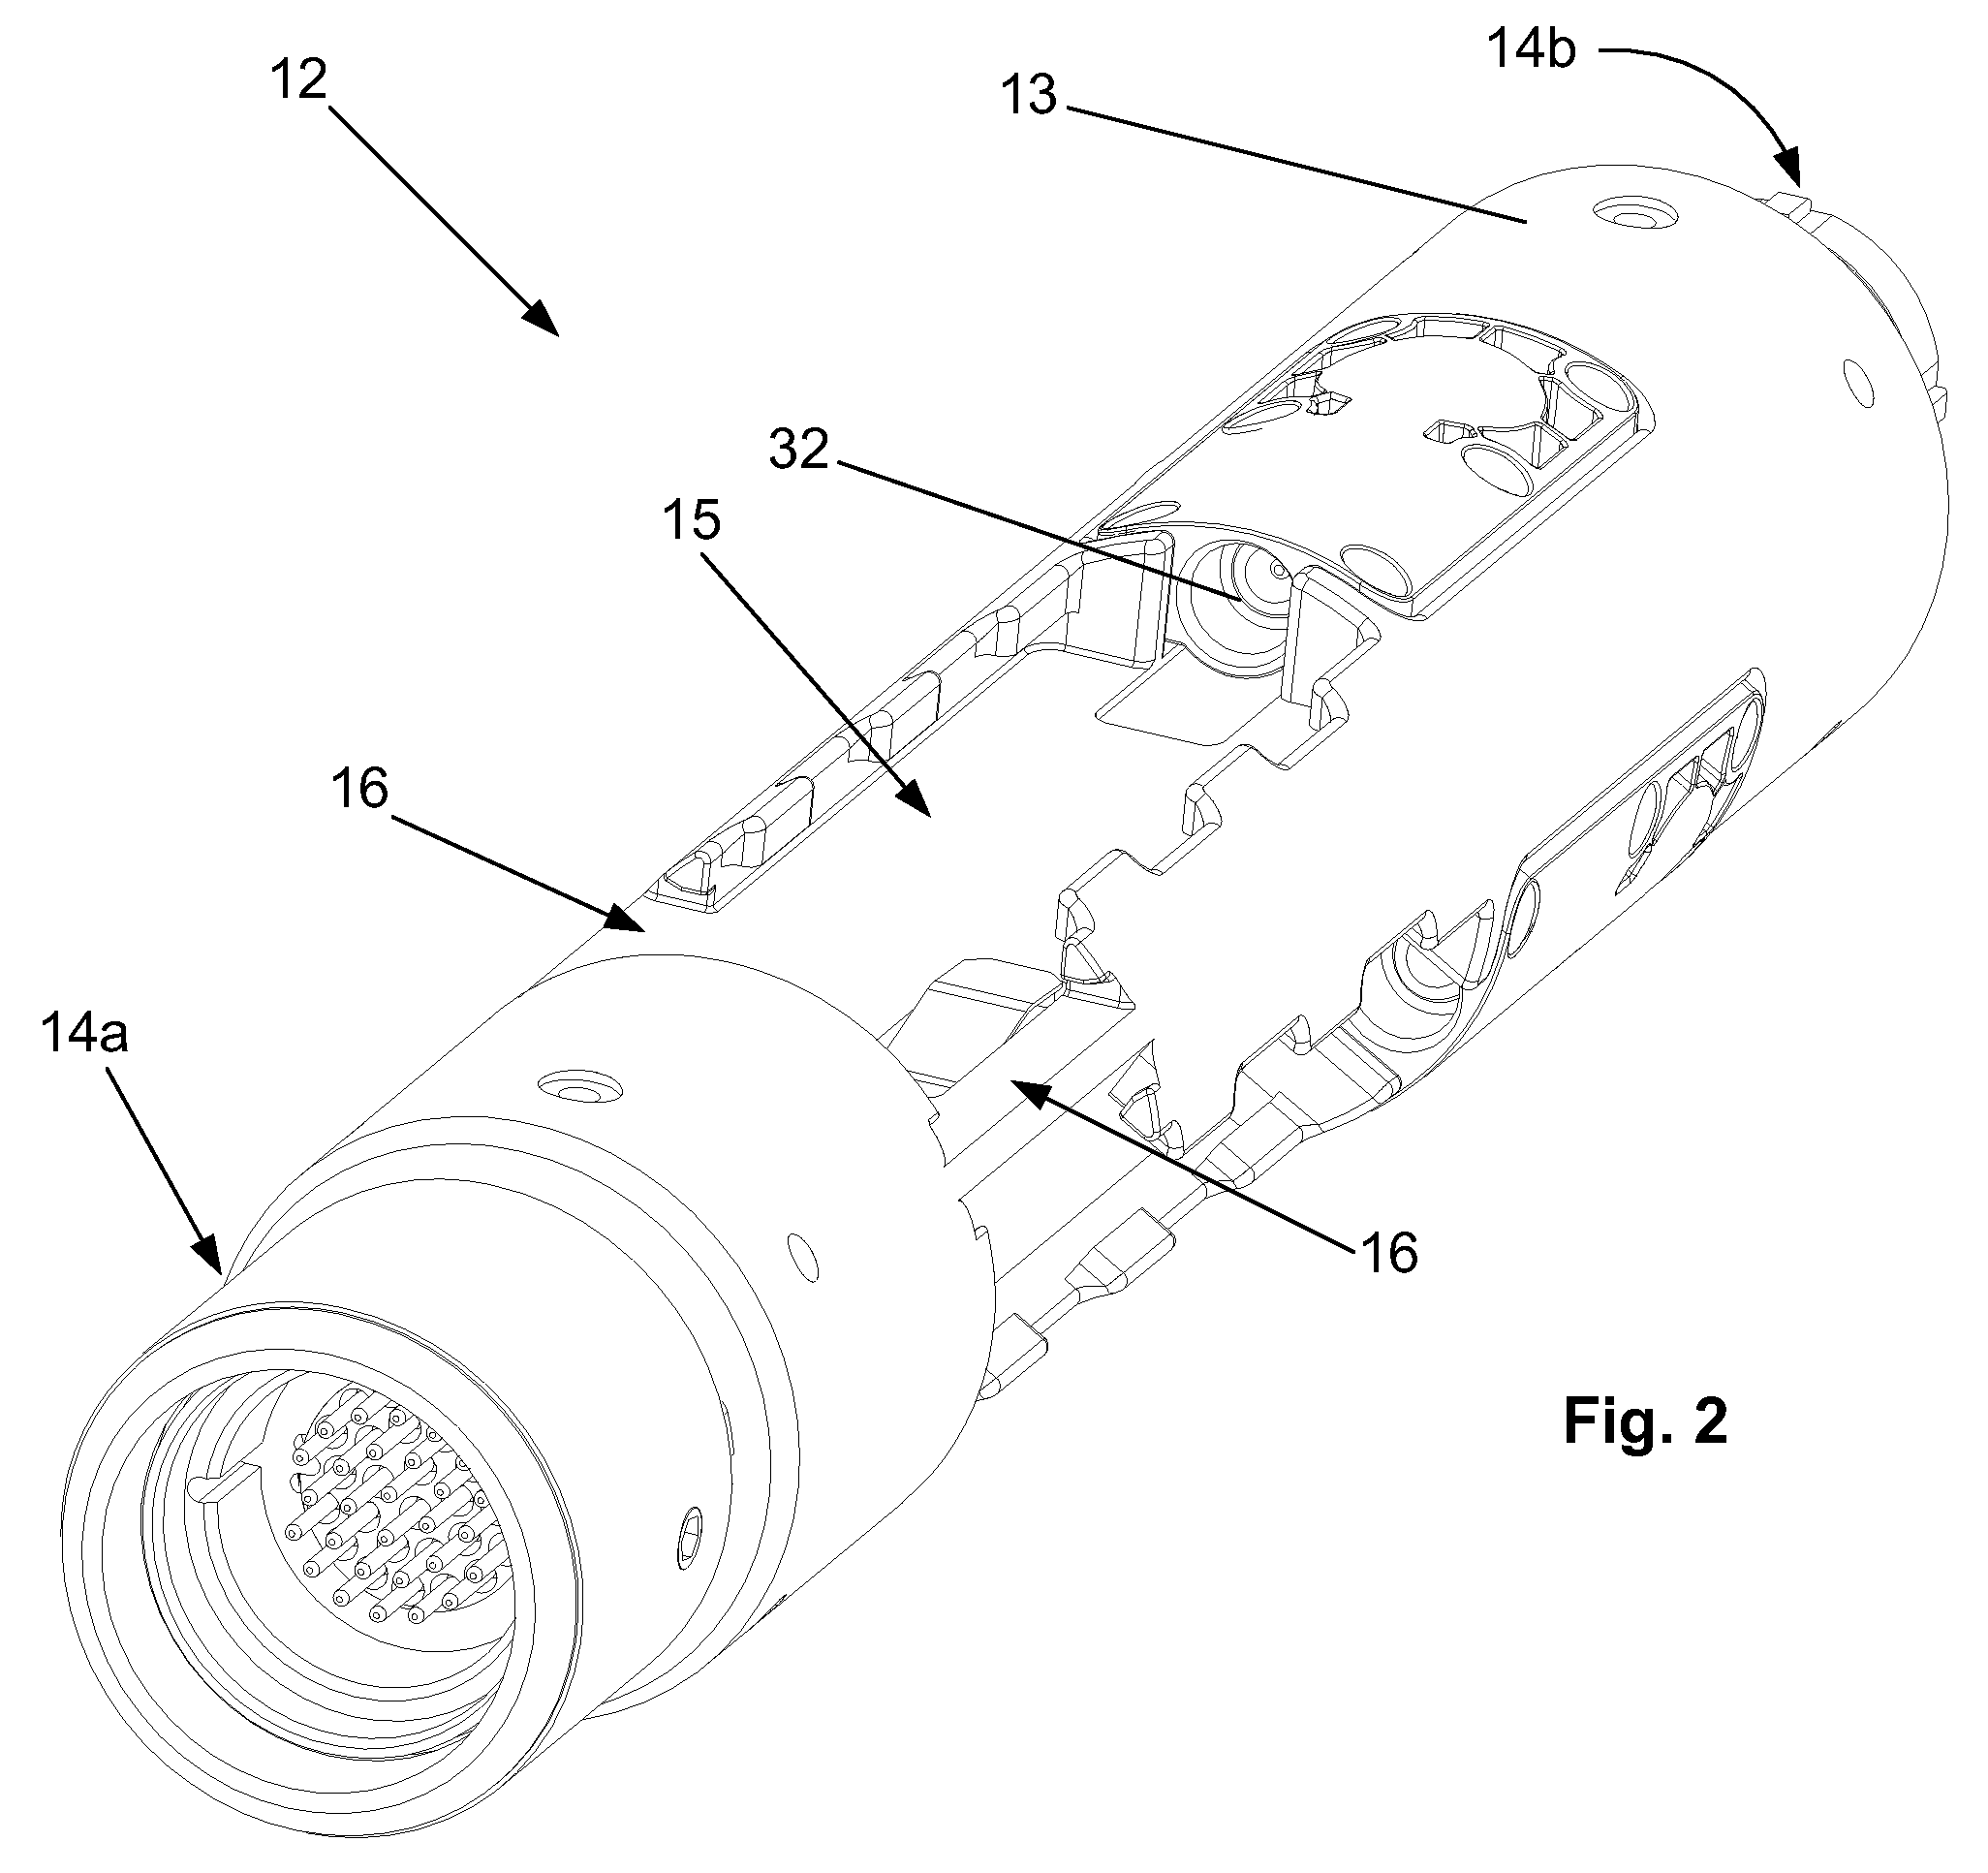 Device for controlling the position of an instrument cable towed in water